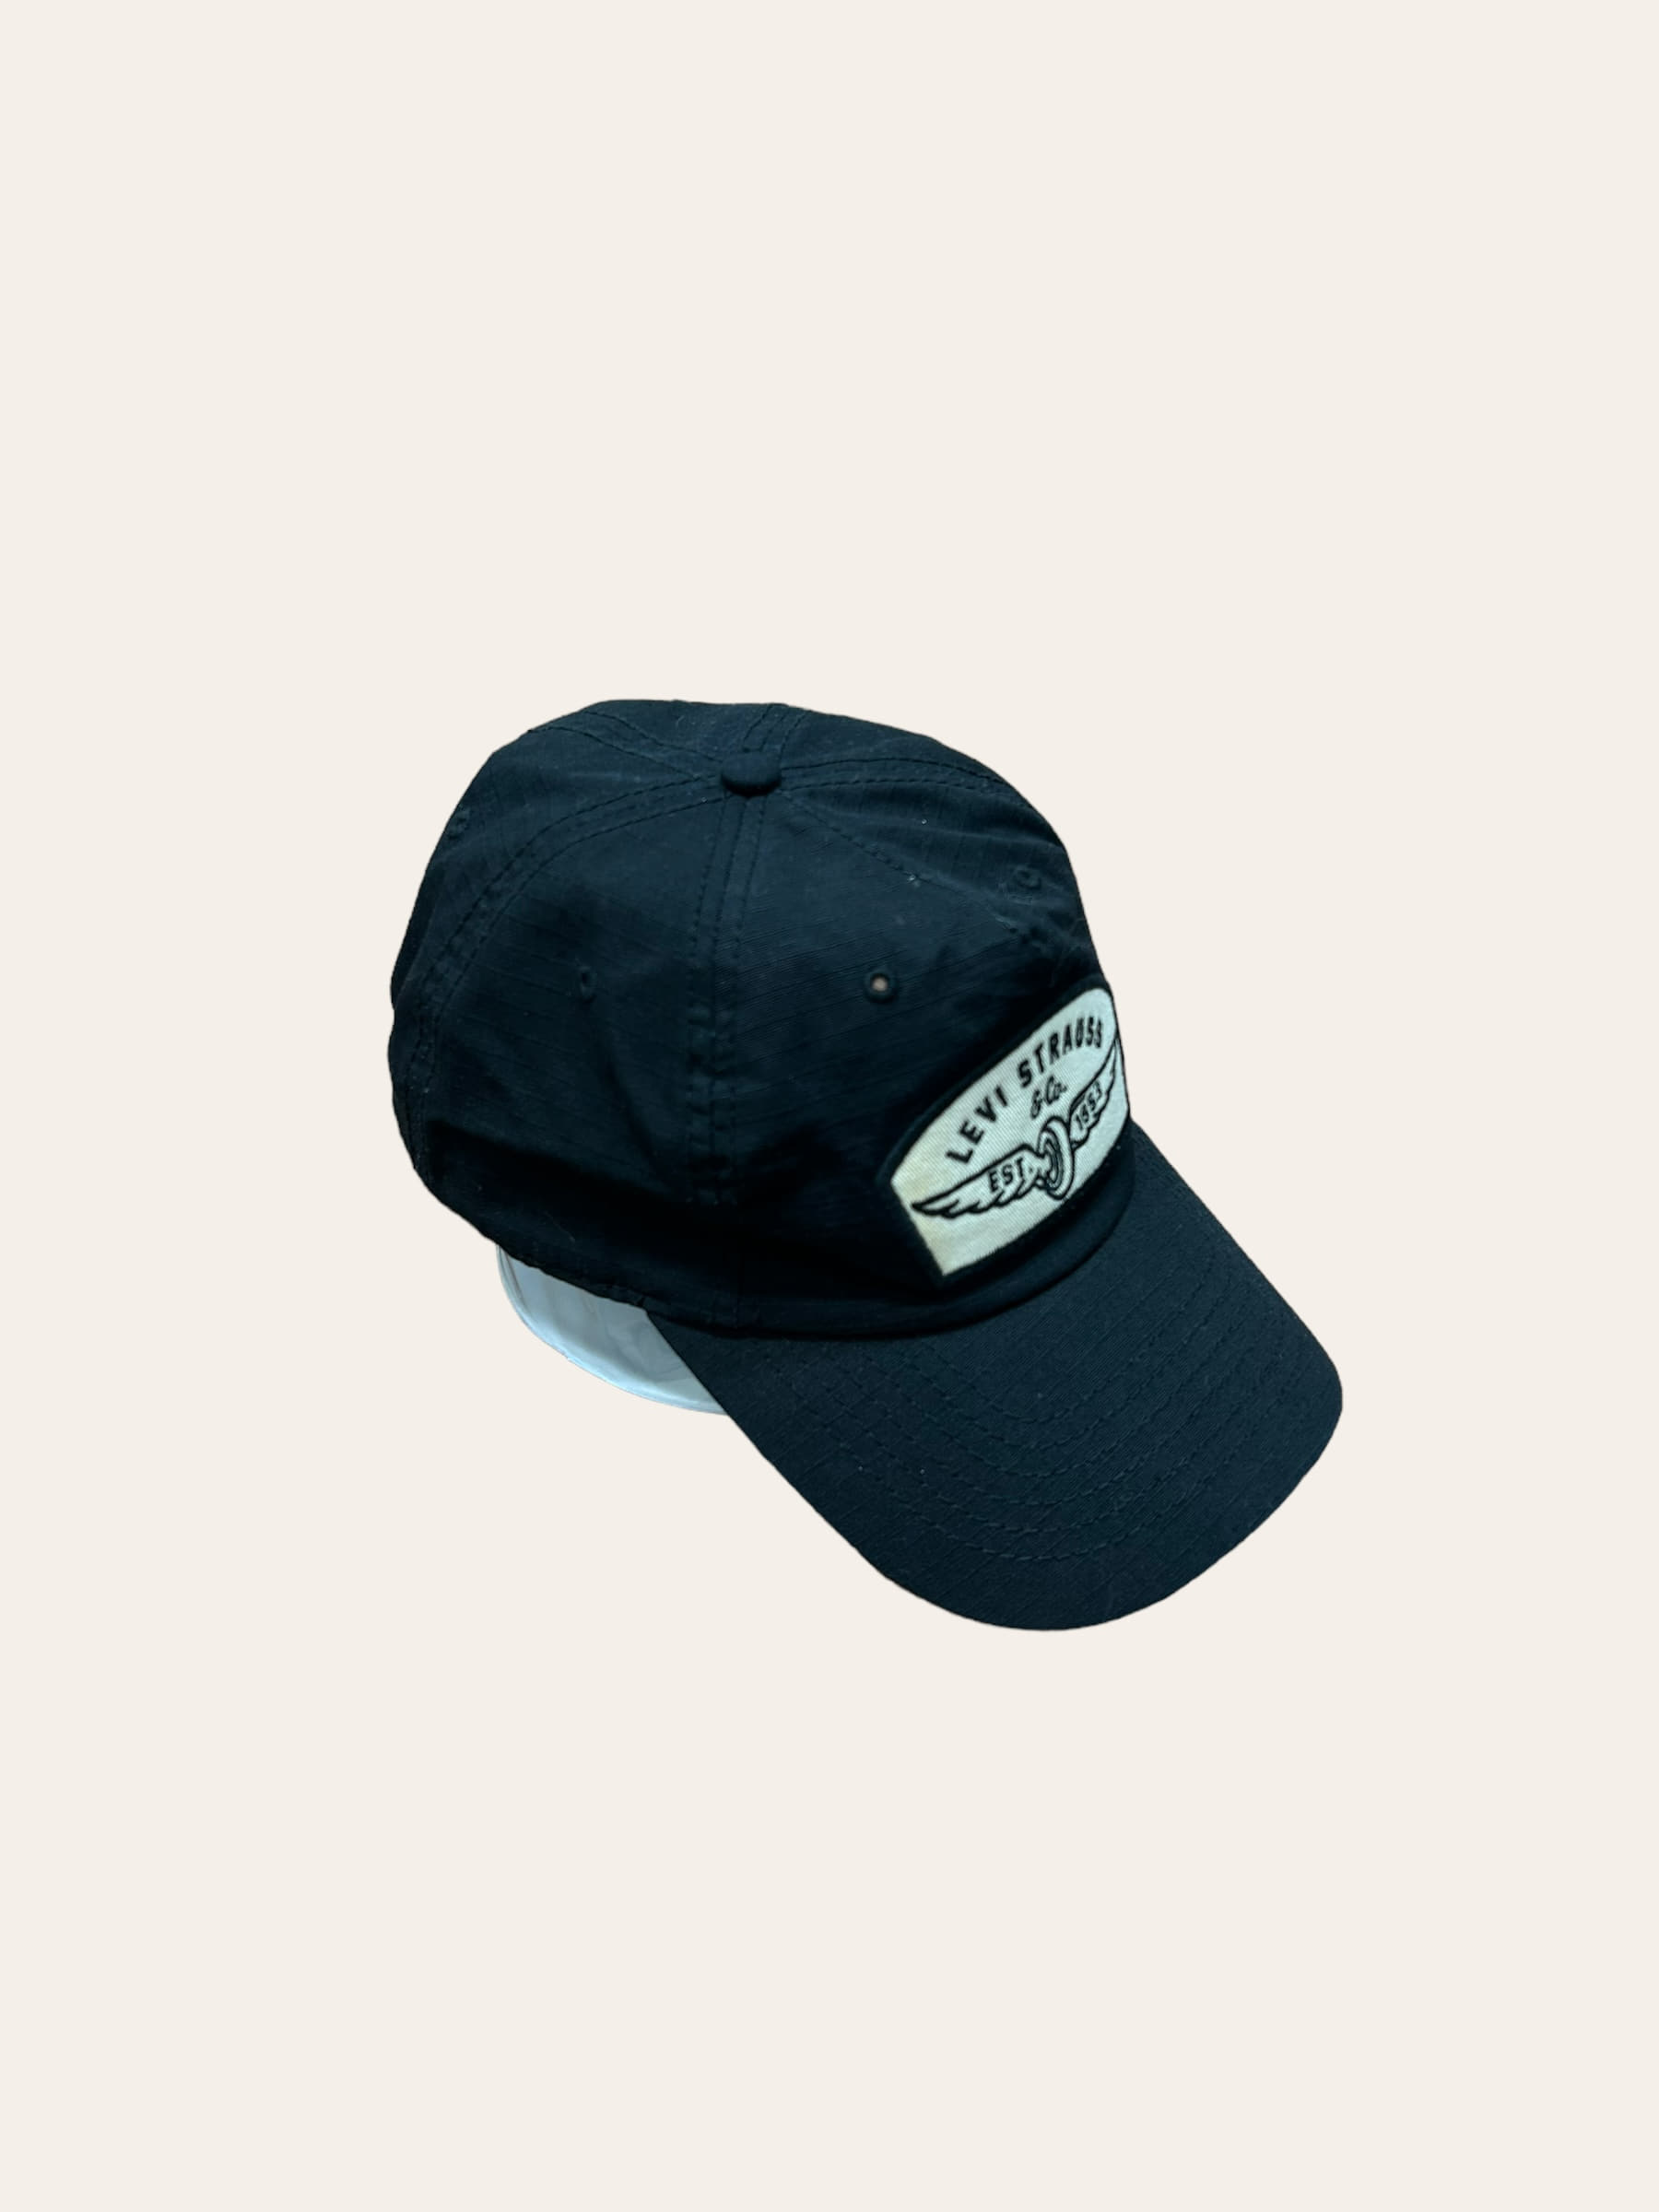 Levis black ripstop military patched cap